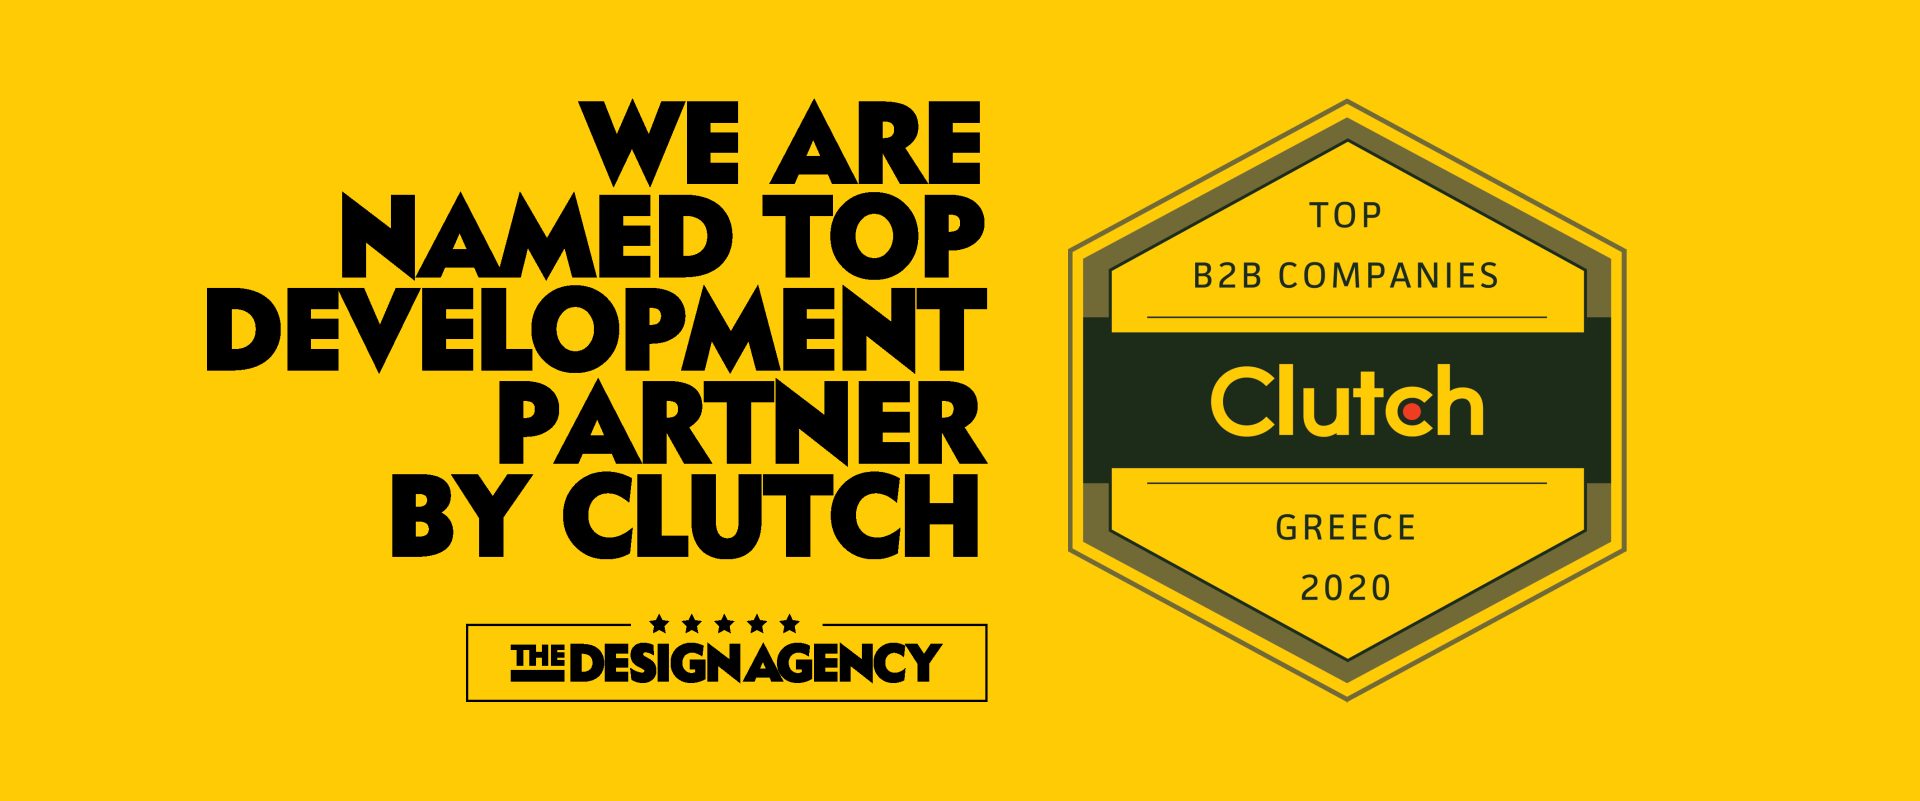 The Design Agency Greece Named Top Development Partner by Clutch